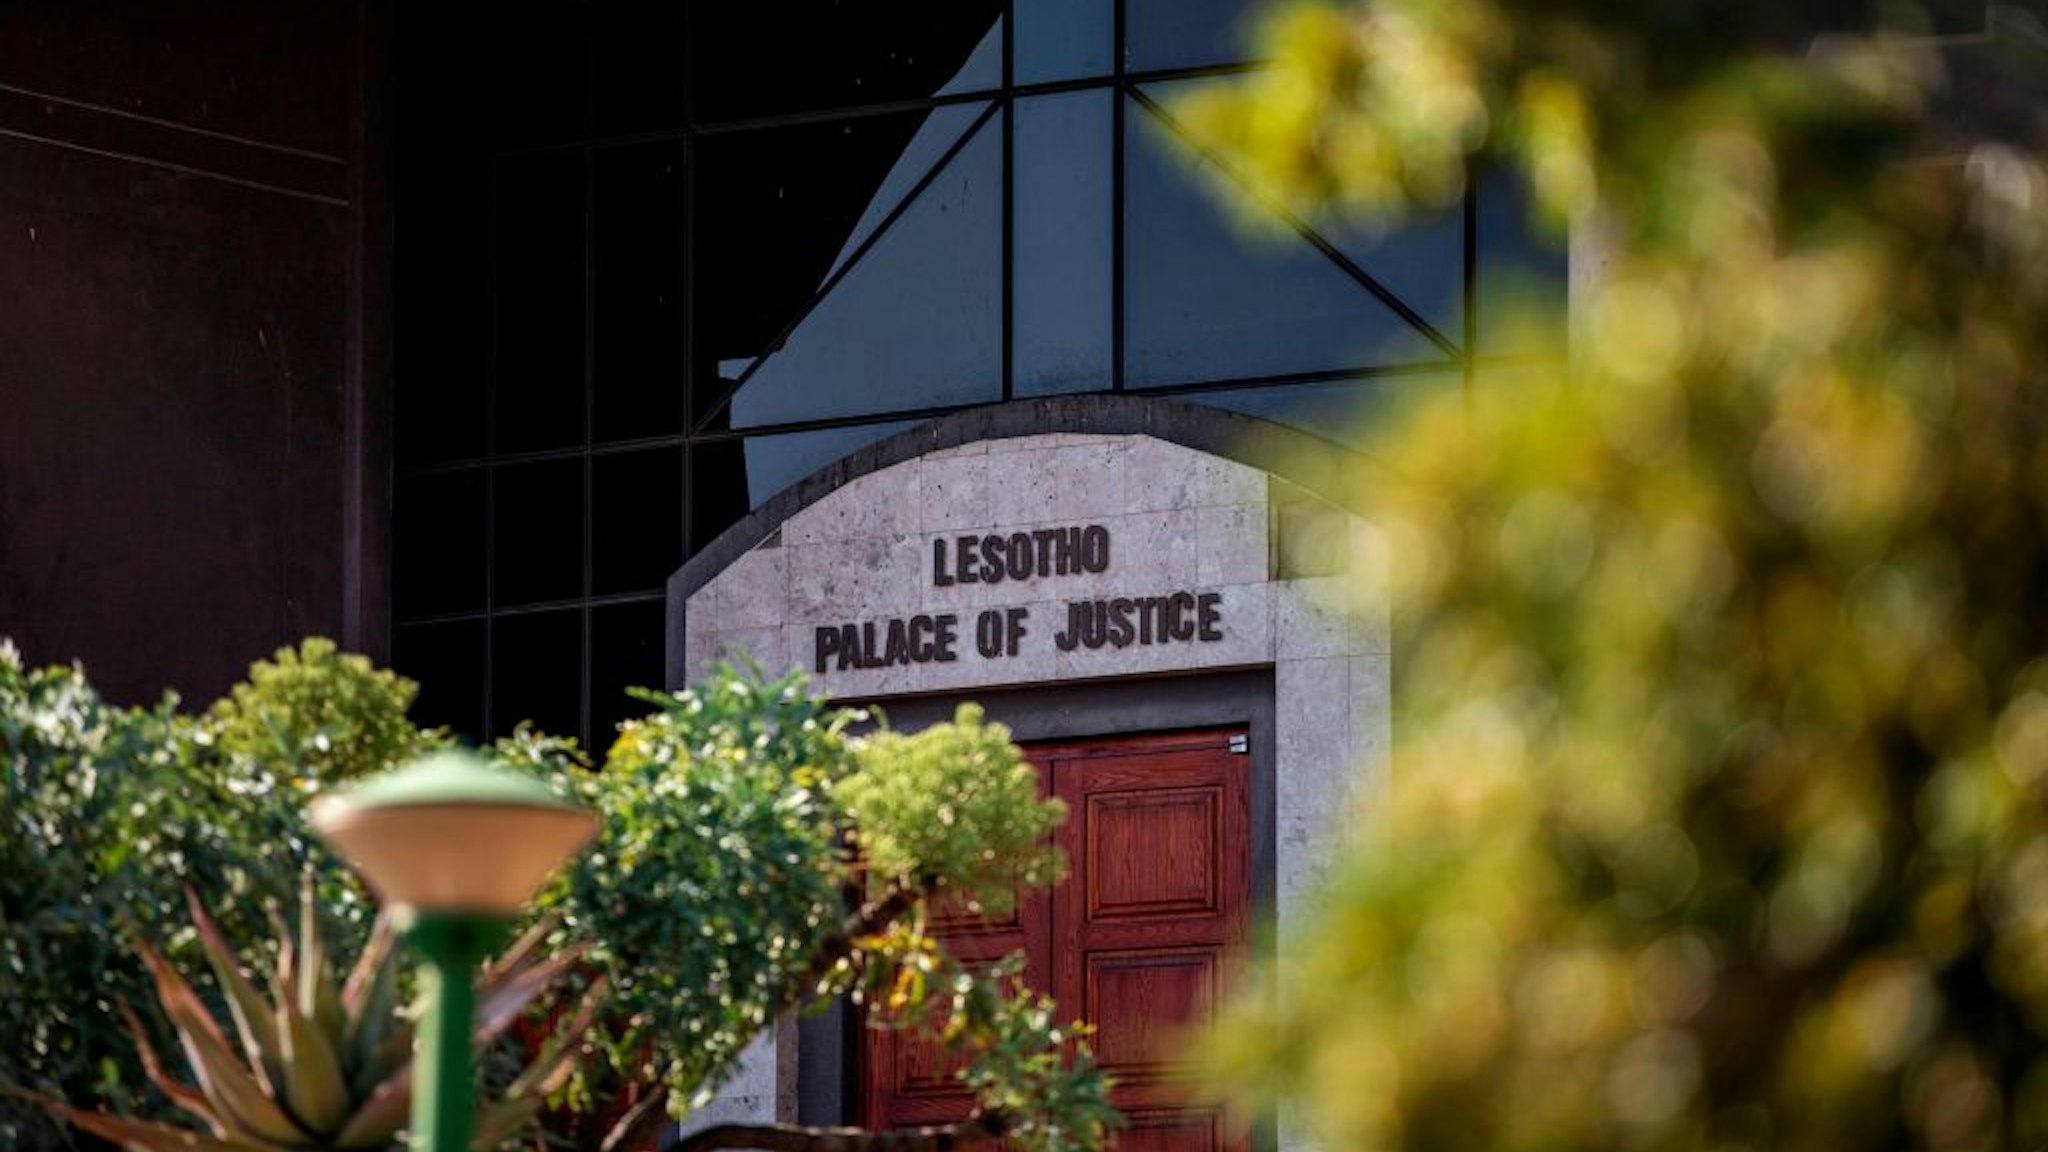 A picture taken in Maseru, Lesotho, on February 2, 2020 shows the exterior of the Palace of Justice of Lesotho. - Lesotho's first lady Maesaiah Thabane was charged with murder on February 4, 2020 for alleged links to the brutal 2017 killing of the prime minister's previous wife. (Photo by Michele Spatari / AFP)